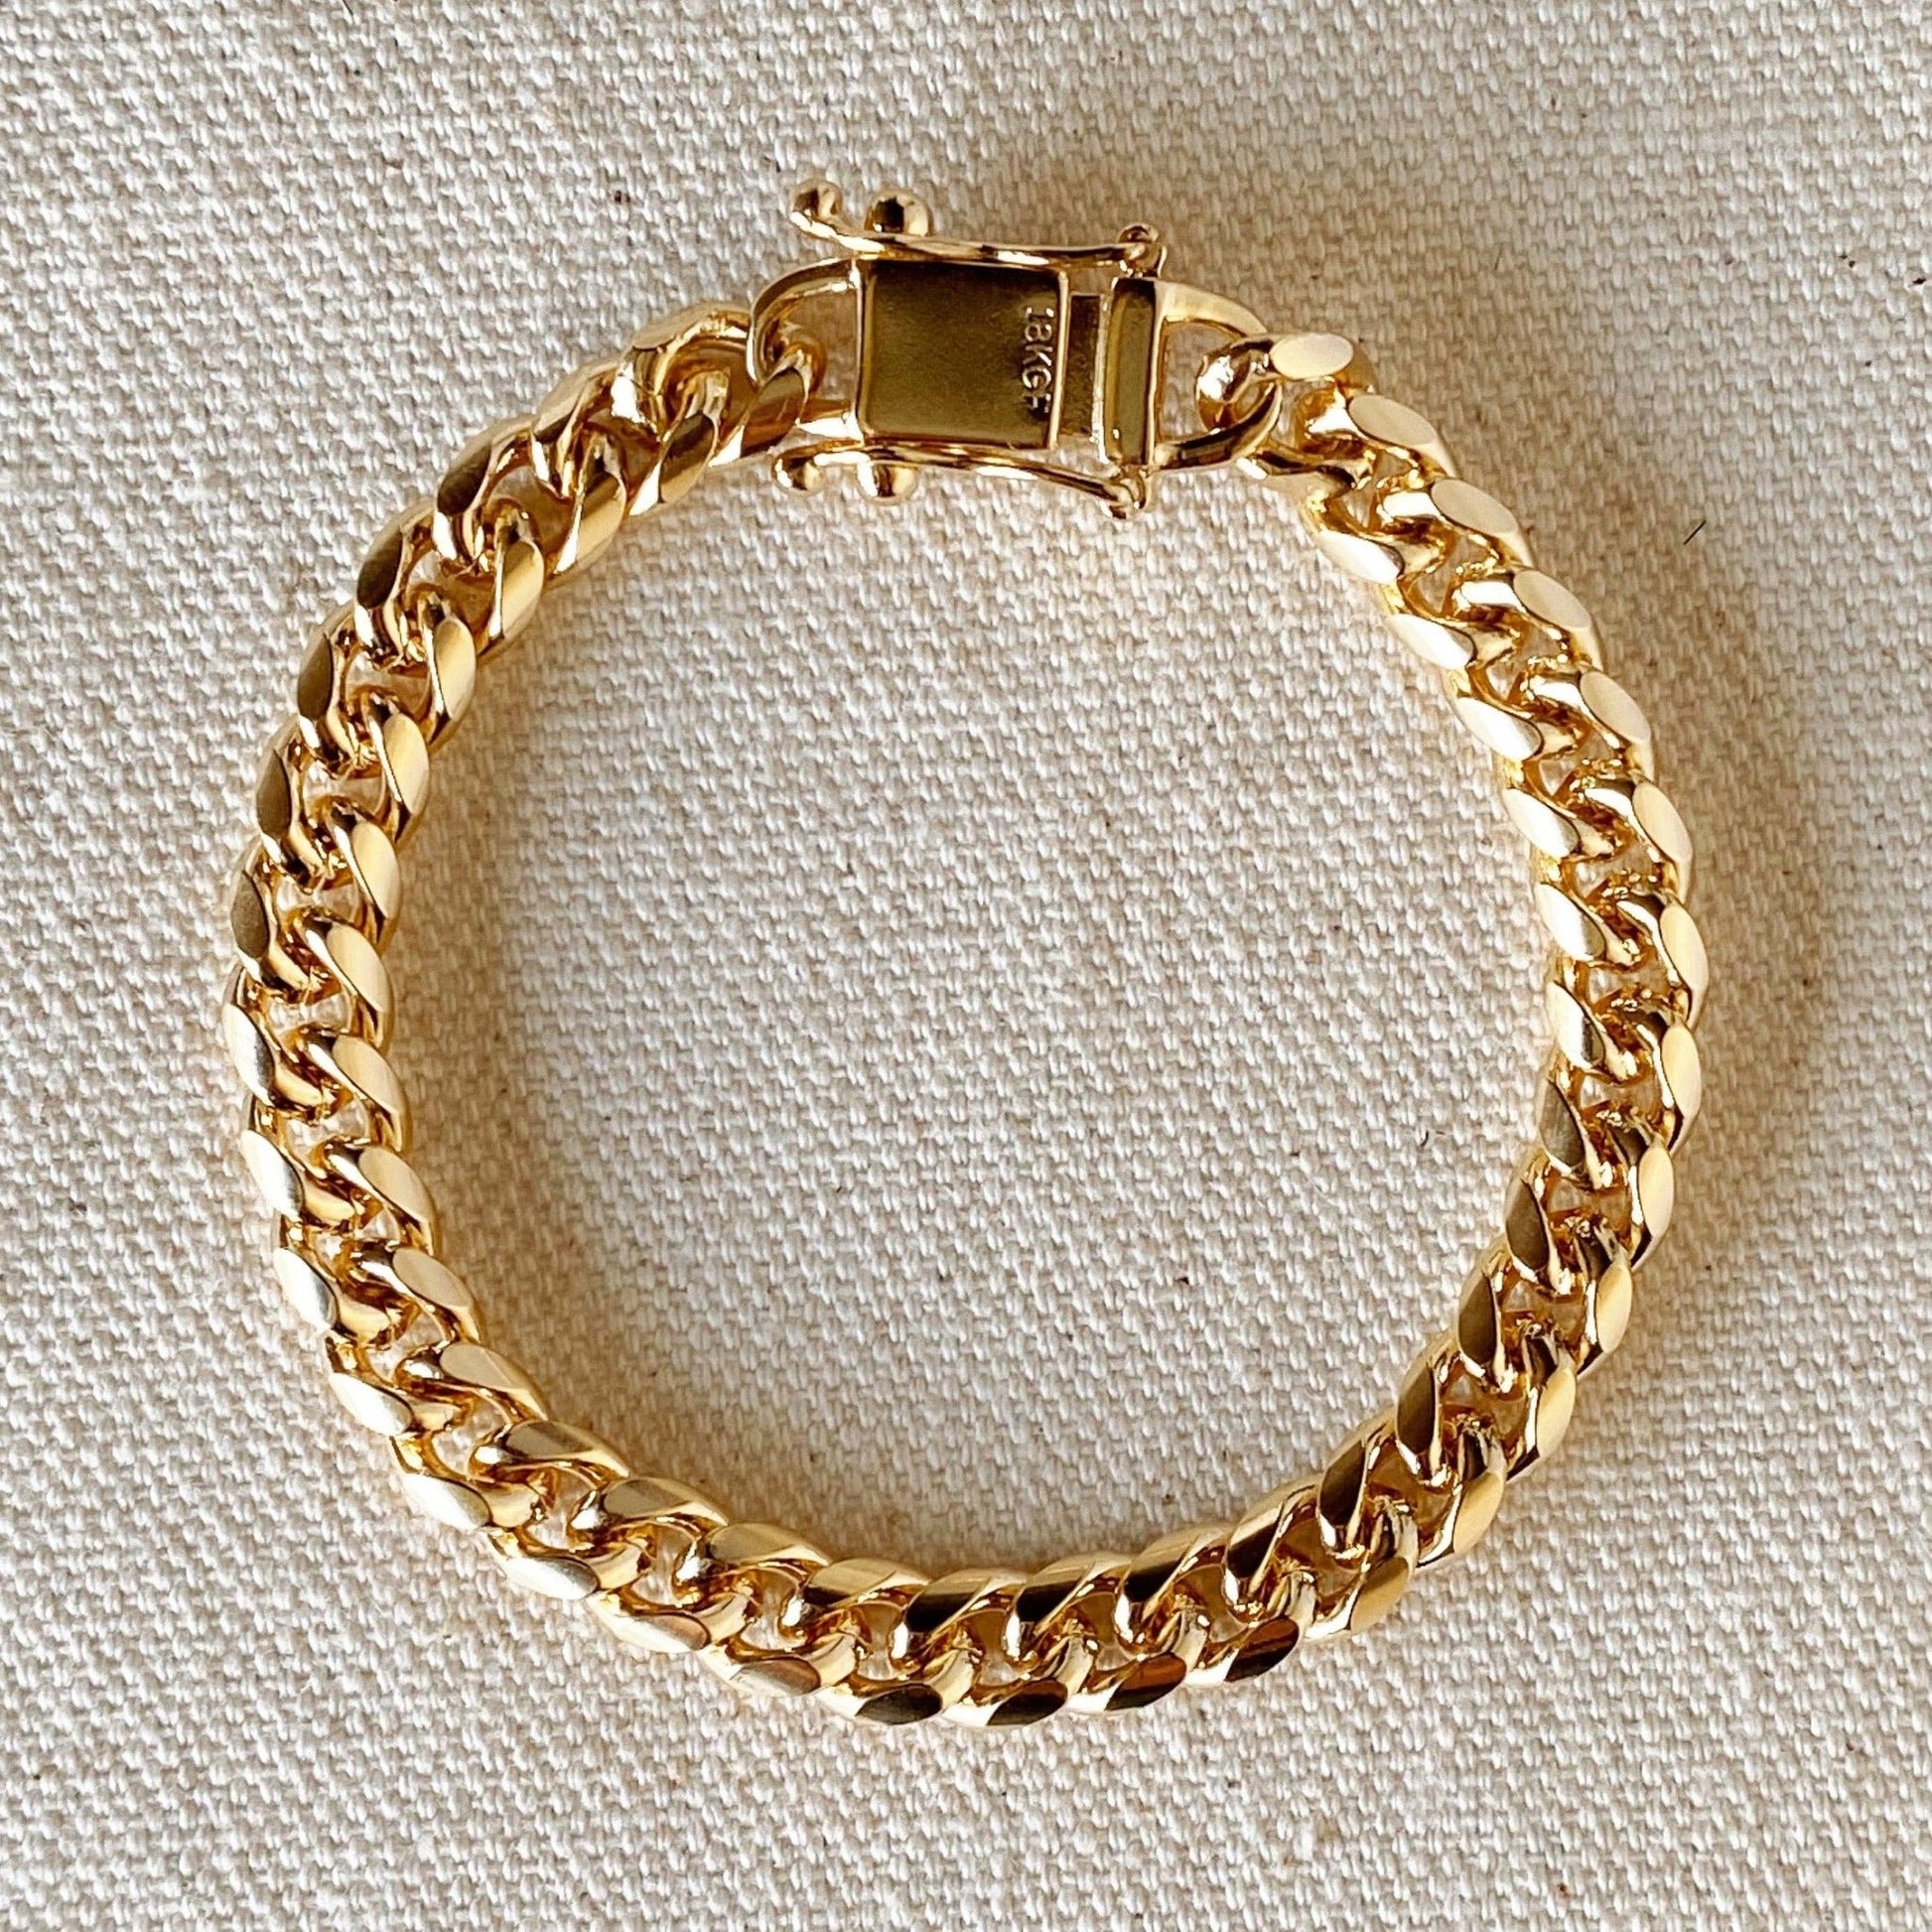 18k Gold Filled Chunky Cuban Bracelet Featuring Box Lock Clasp - FOREVERLINKX